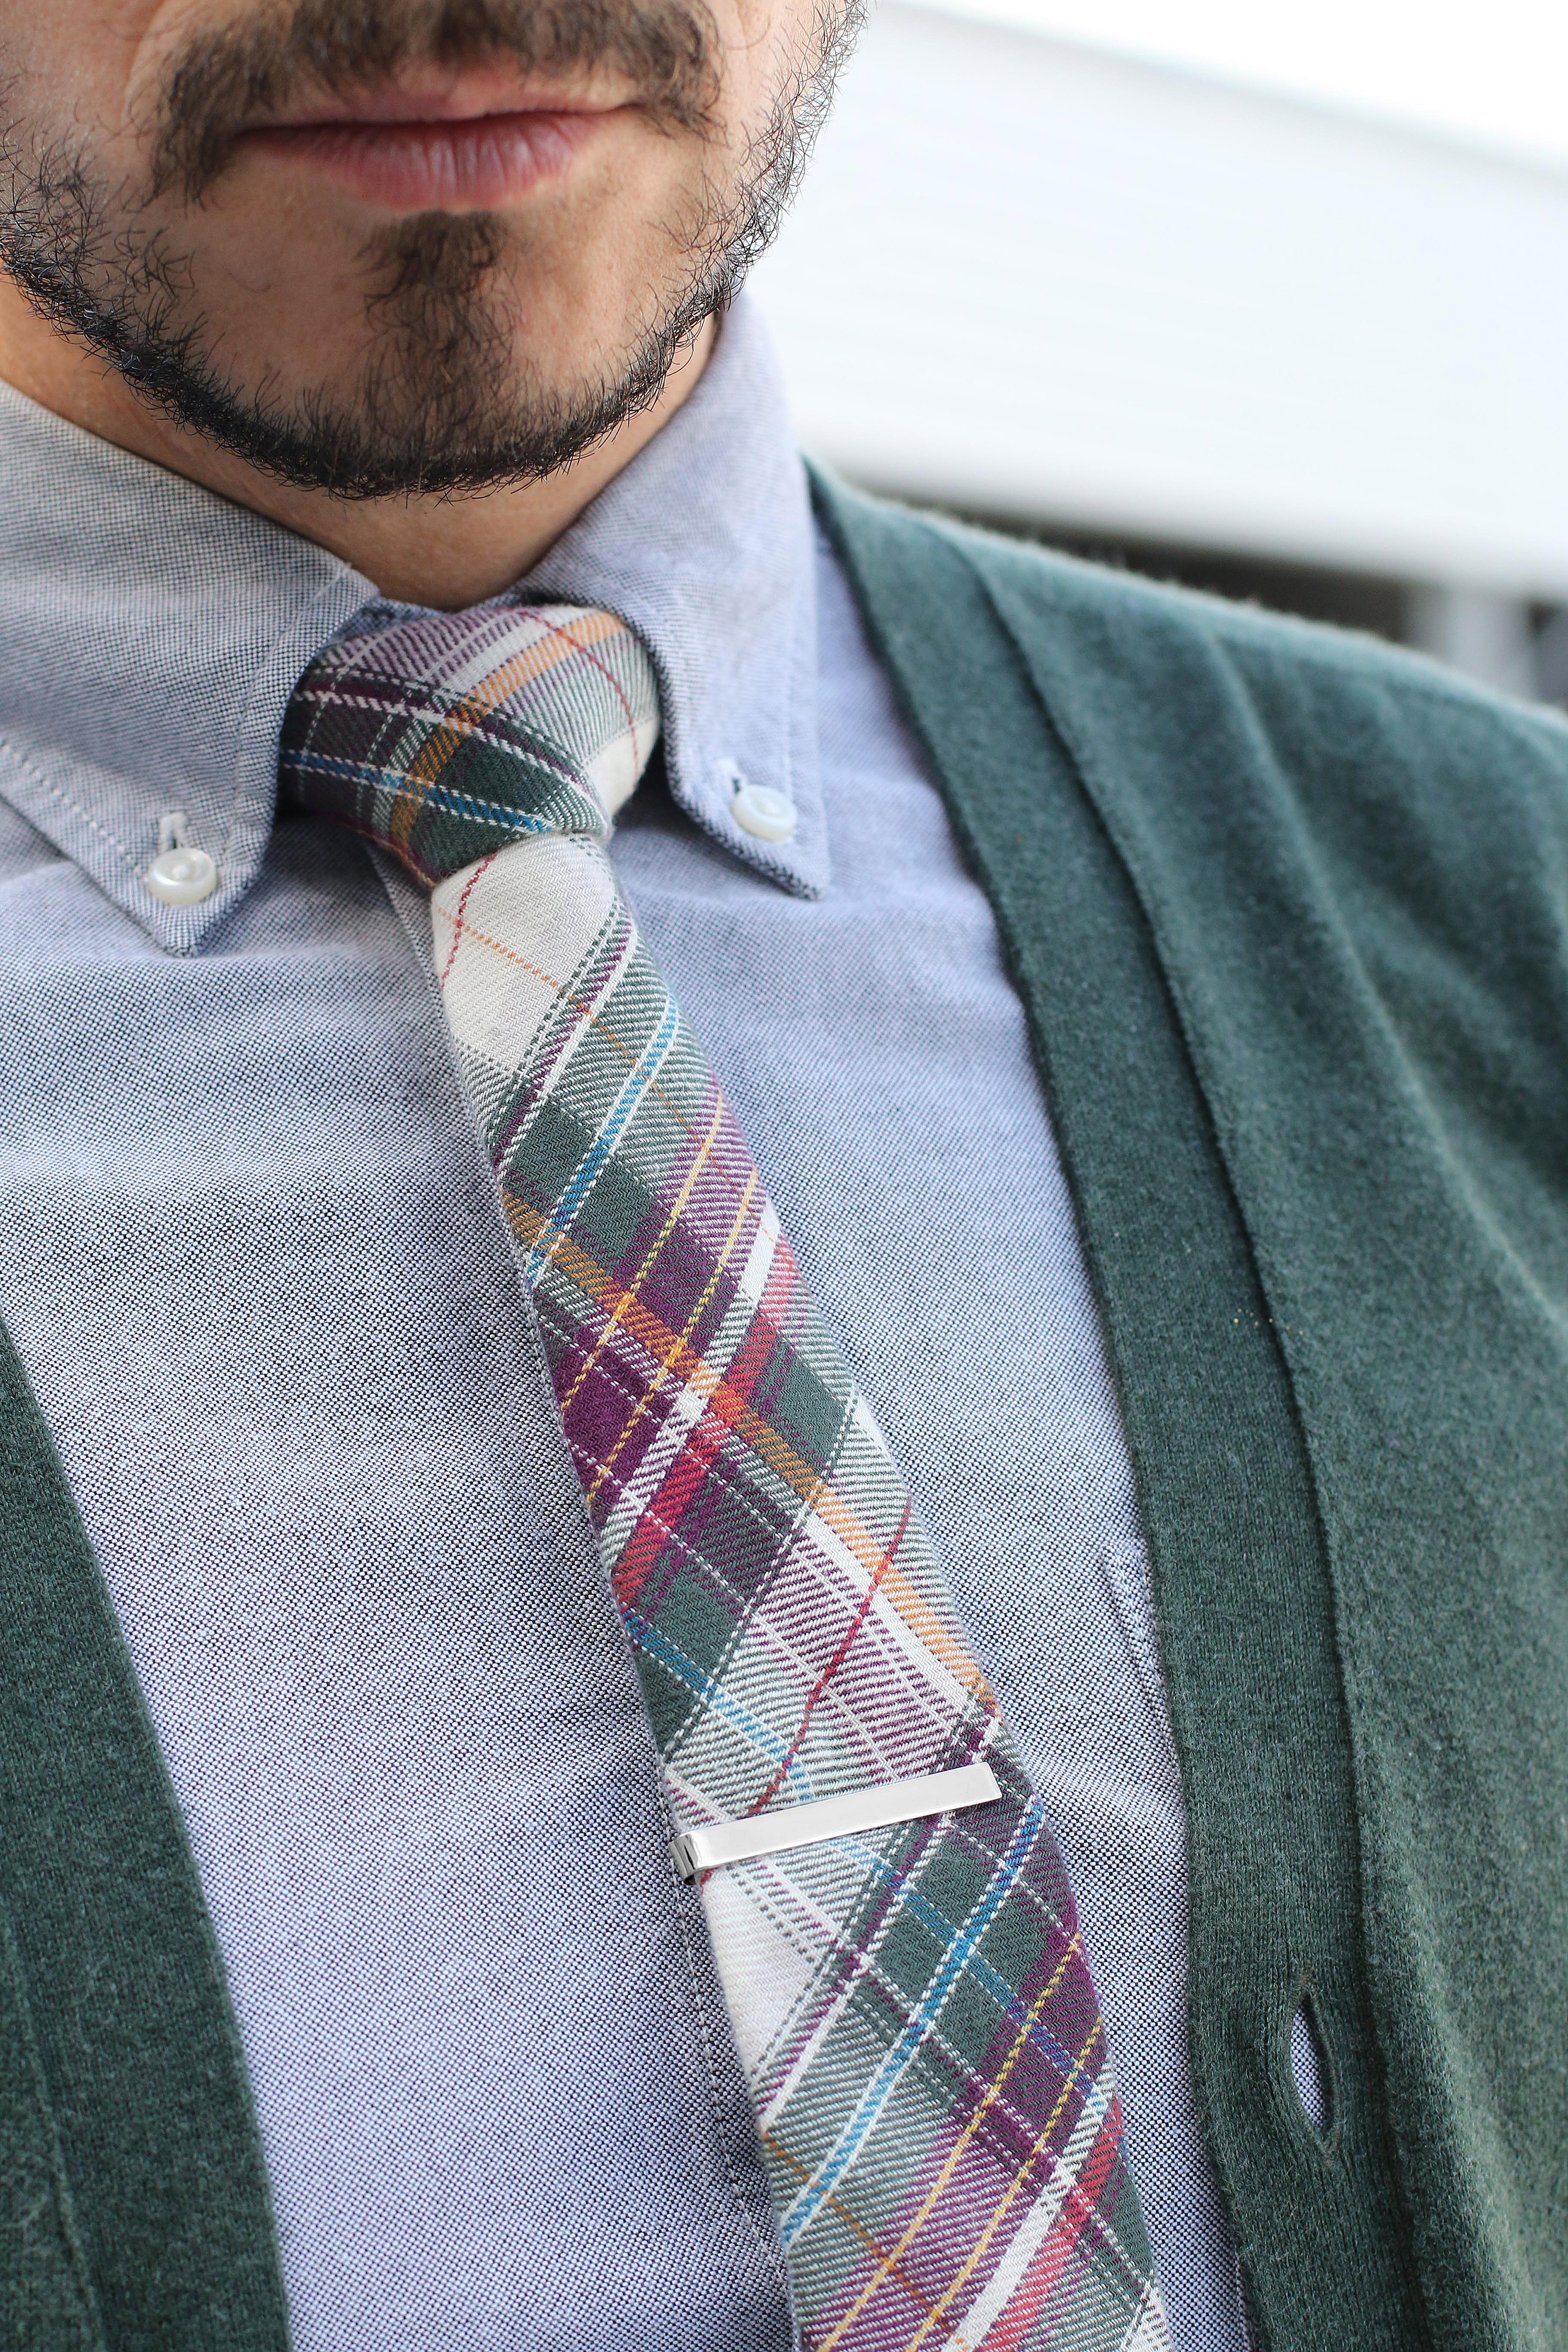 A Beginner's Guide to Tie Pins, Tie Clips, and Tie Bars